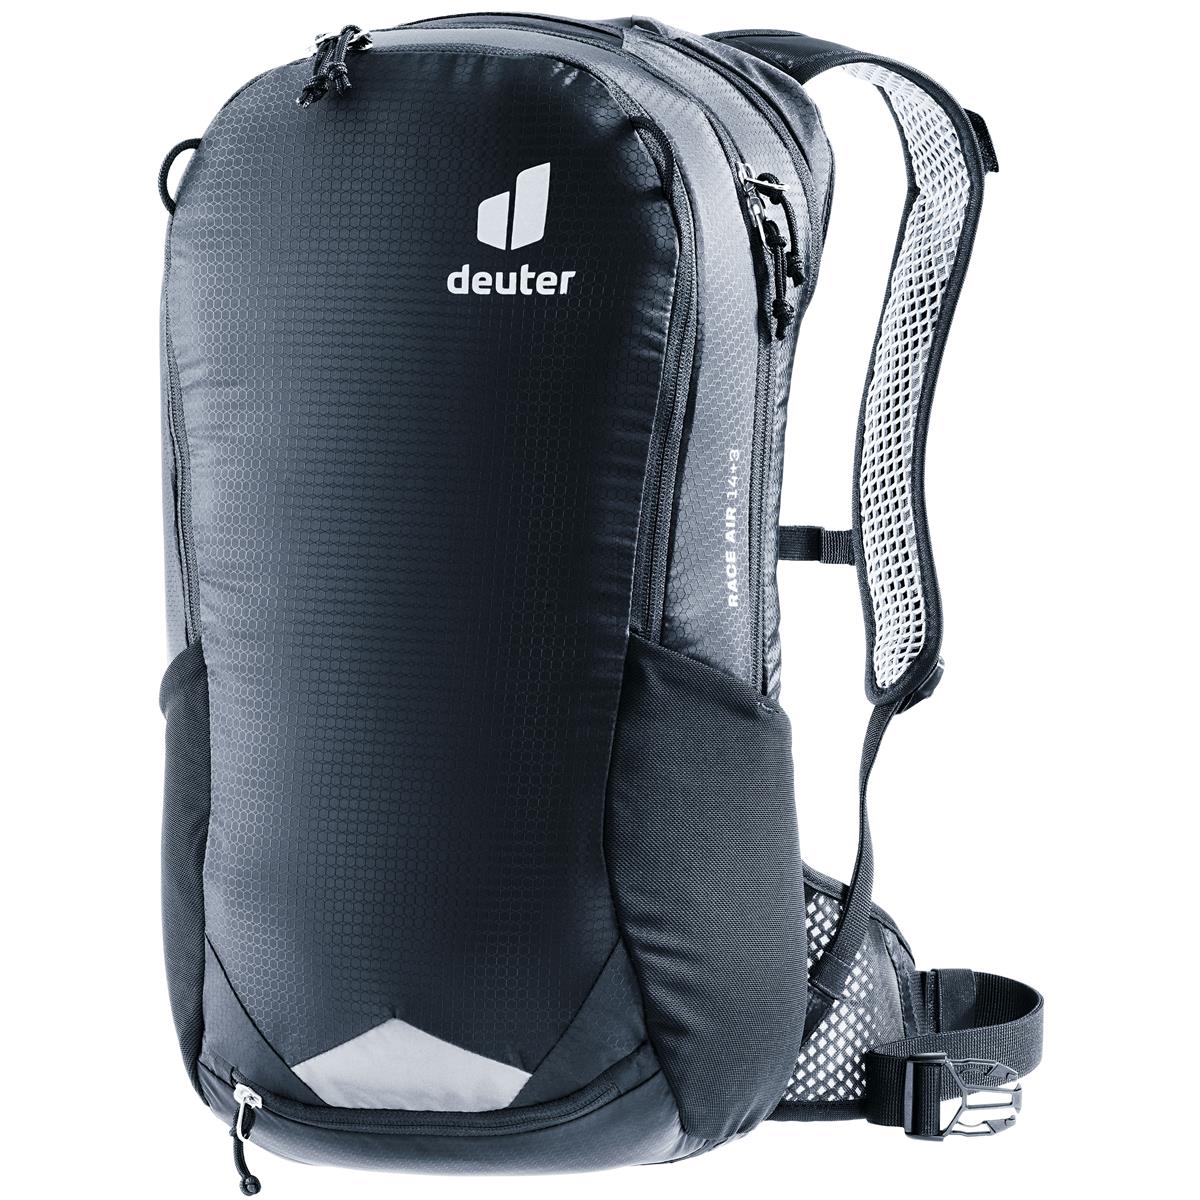 Deuter MTB Backpack with Hydration System Compartment Race Air 14+3 14+3L - Black